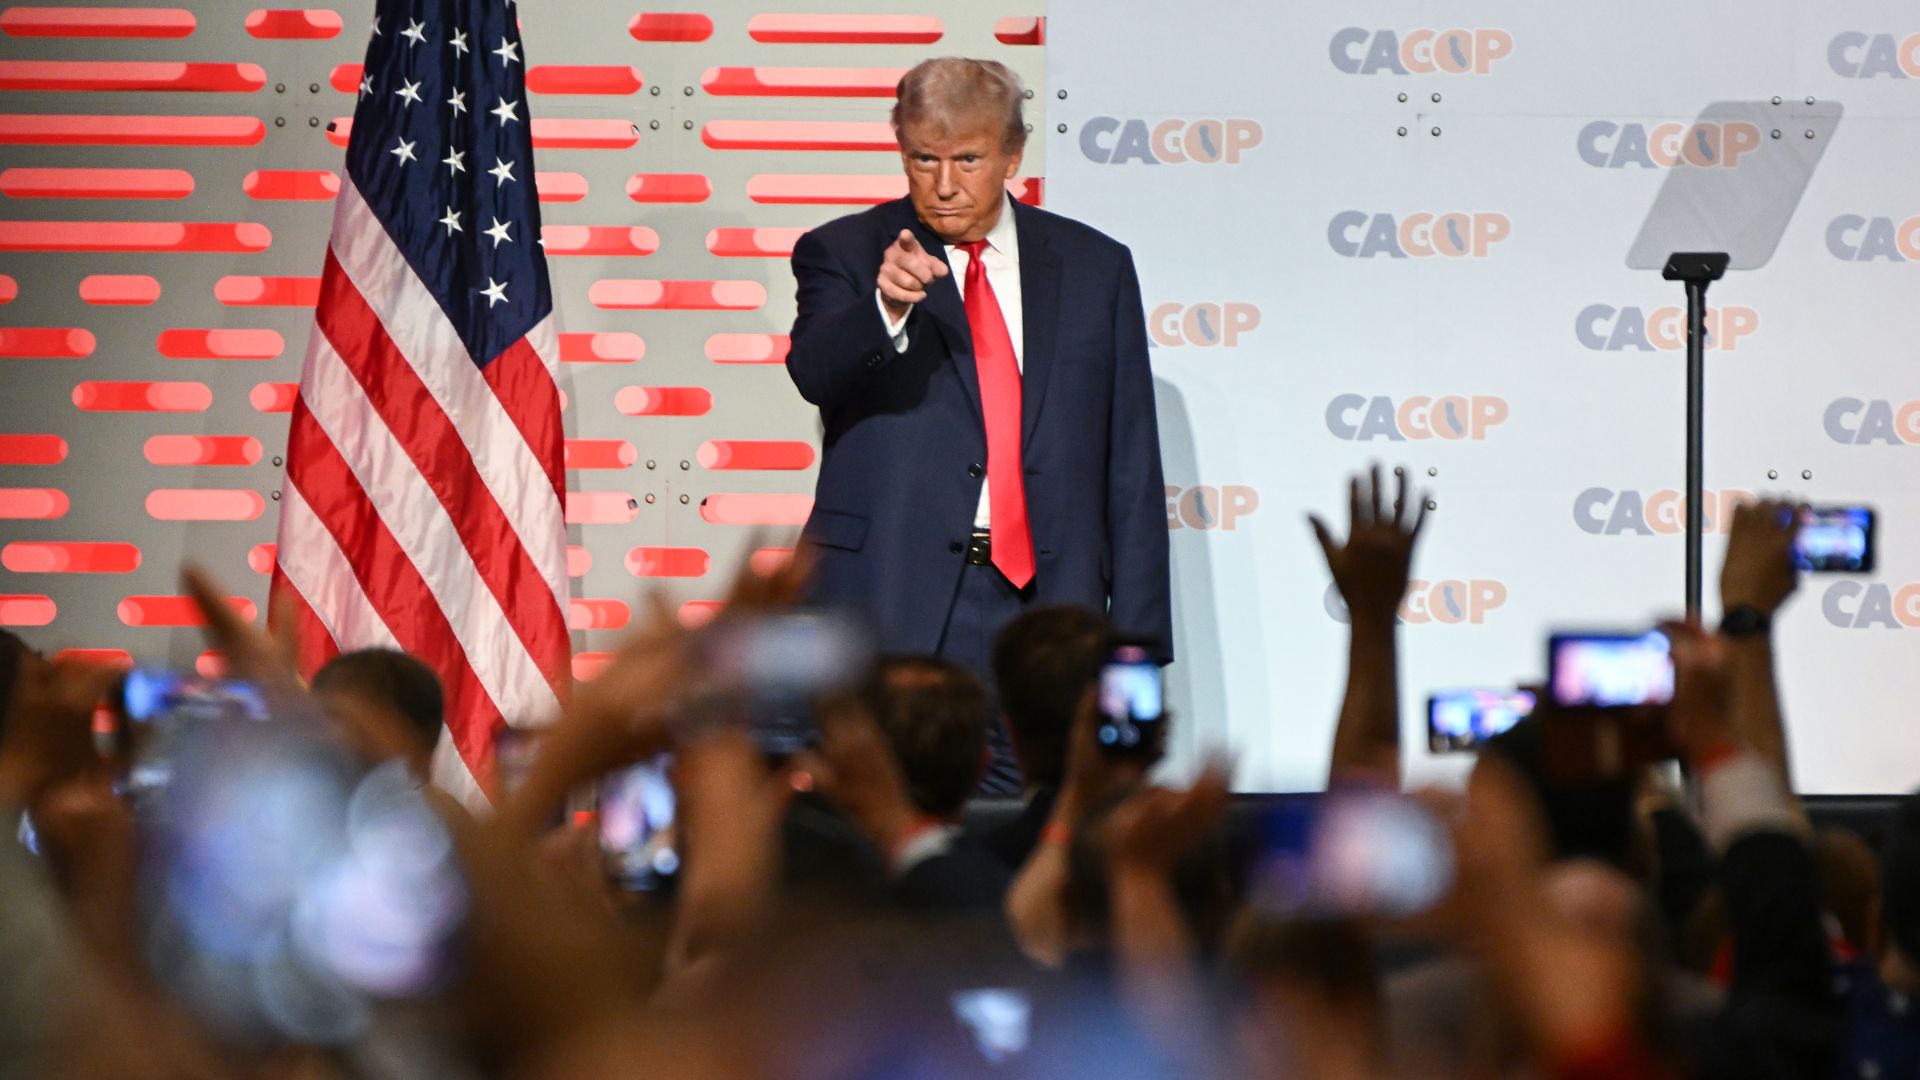 At California GOP Convention, Trump Blasts ‘Left-Wing Liars, Losers, Creeps, Perverts, And Freaks’ Ruining State